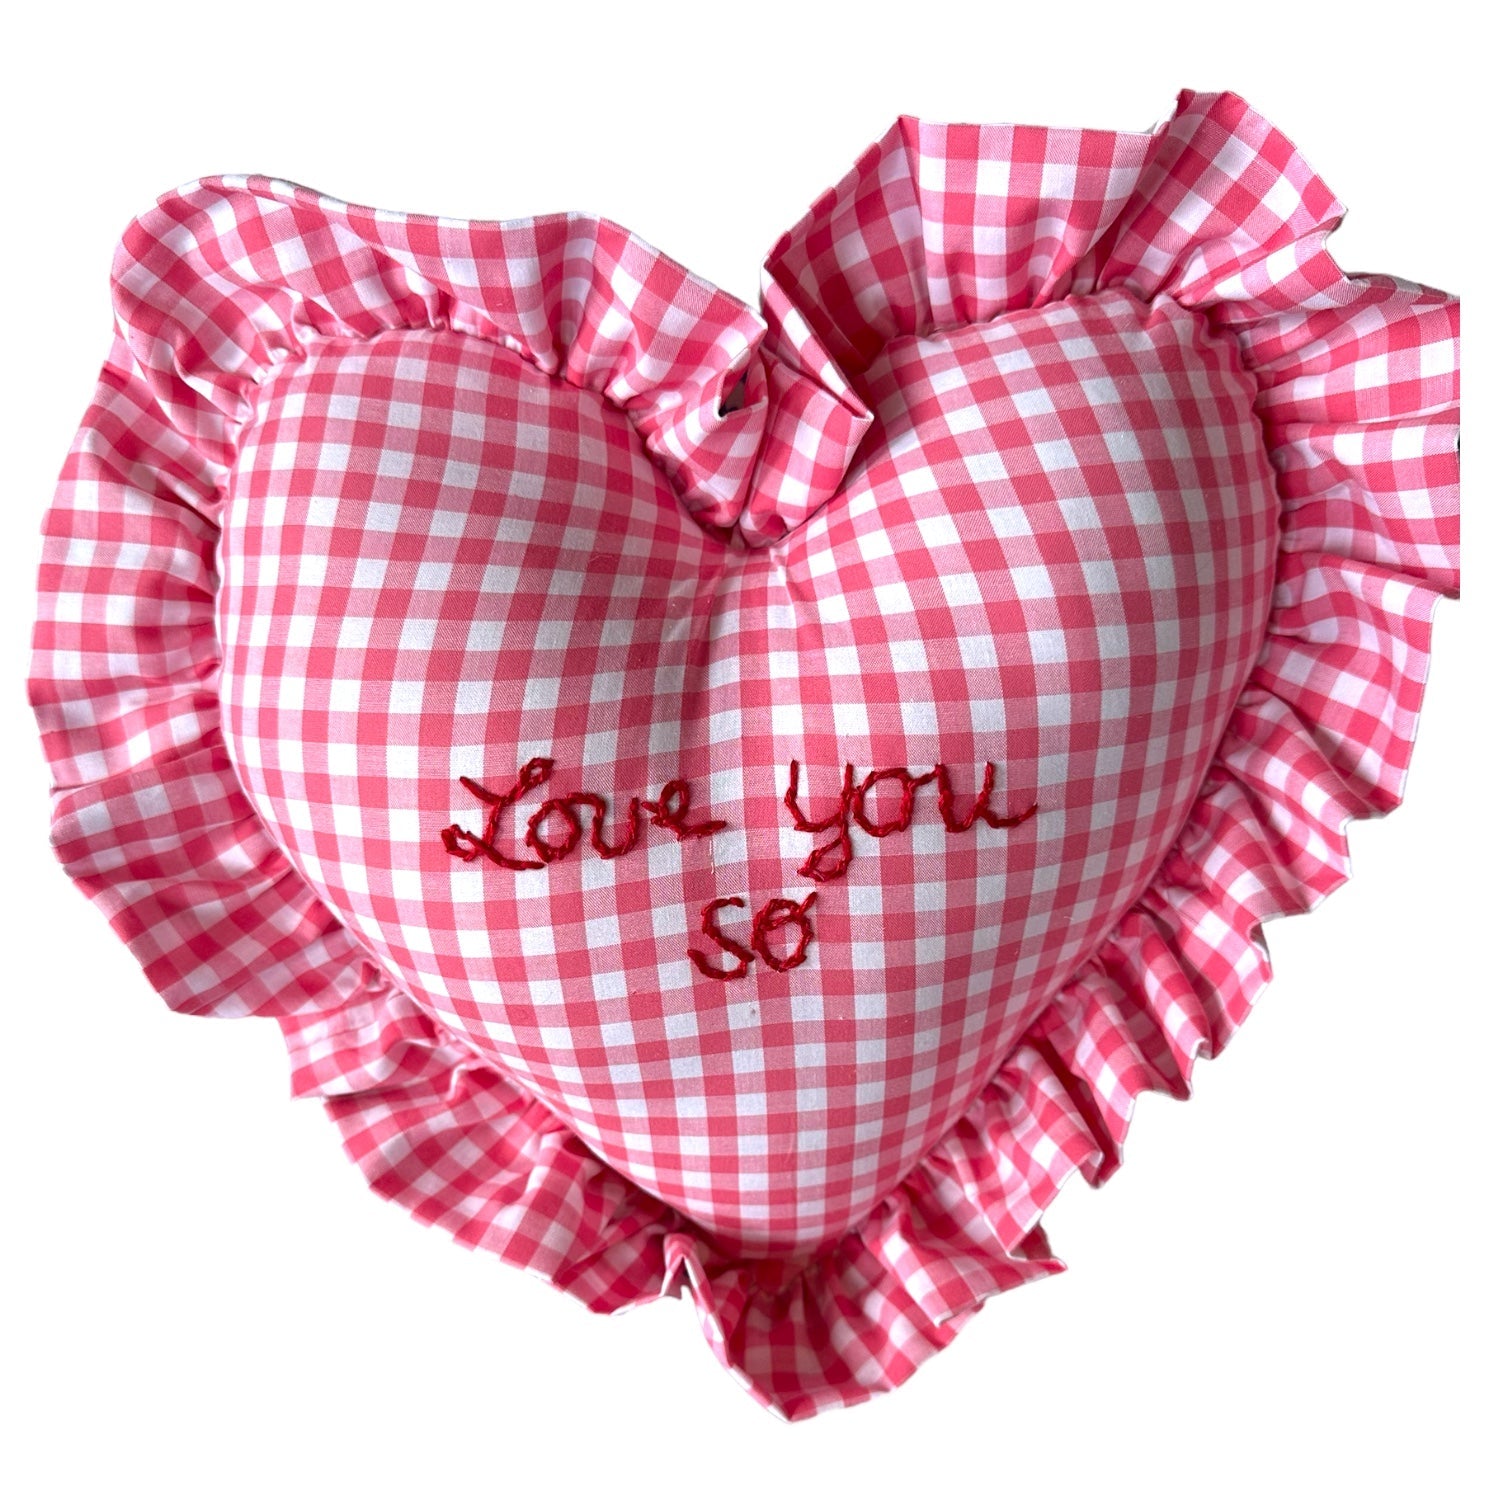 Heart Ruffle Pillow - dark pink gingham - Premium  from Tricia Lowenfield Design 